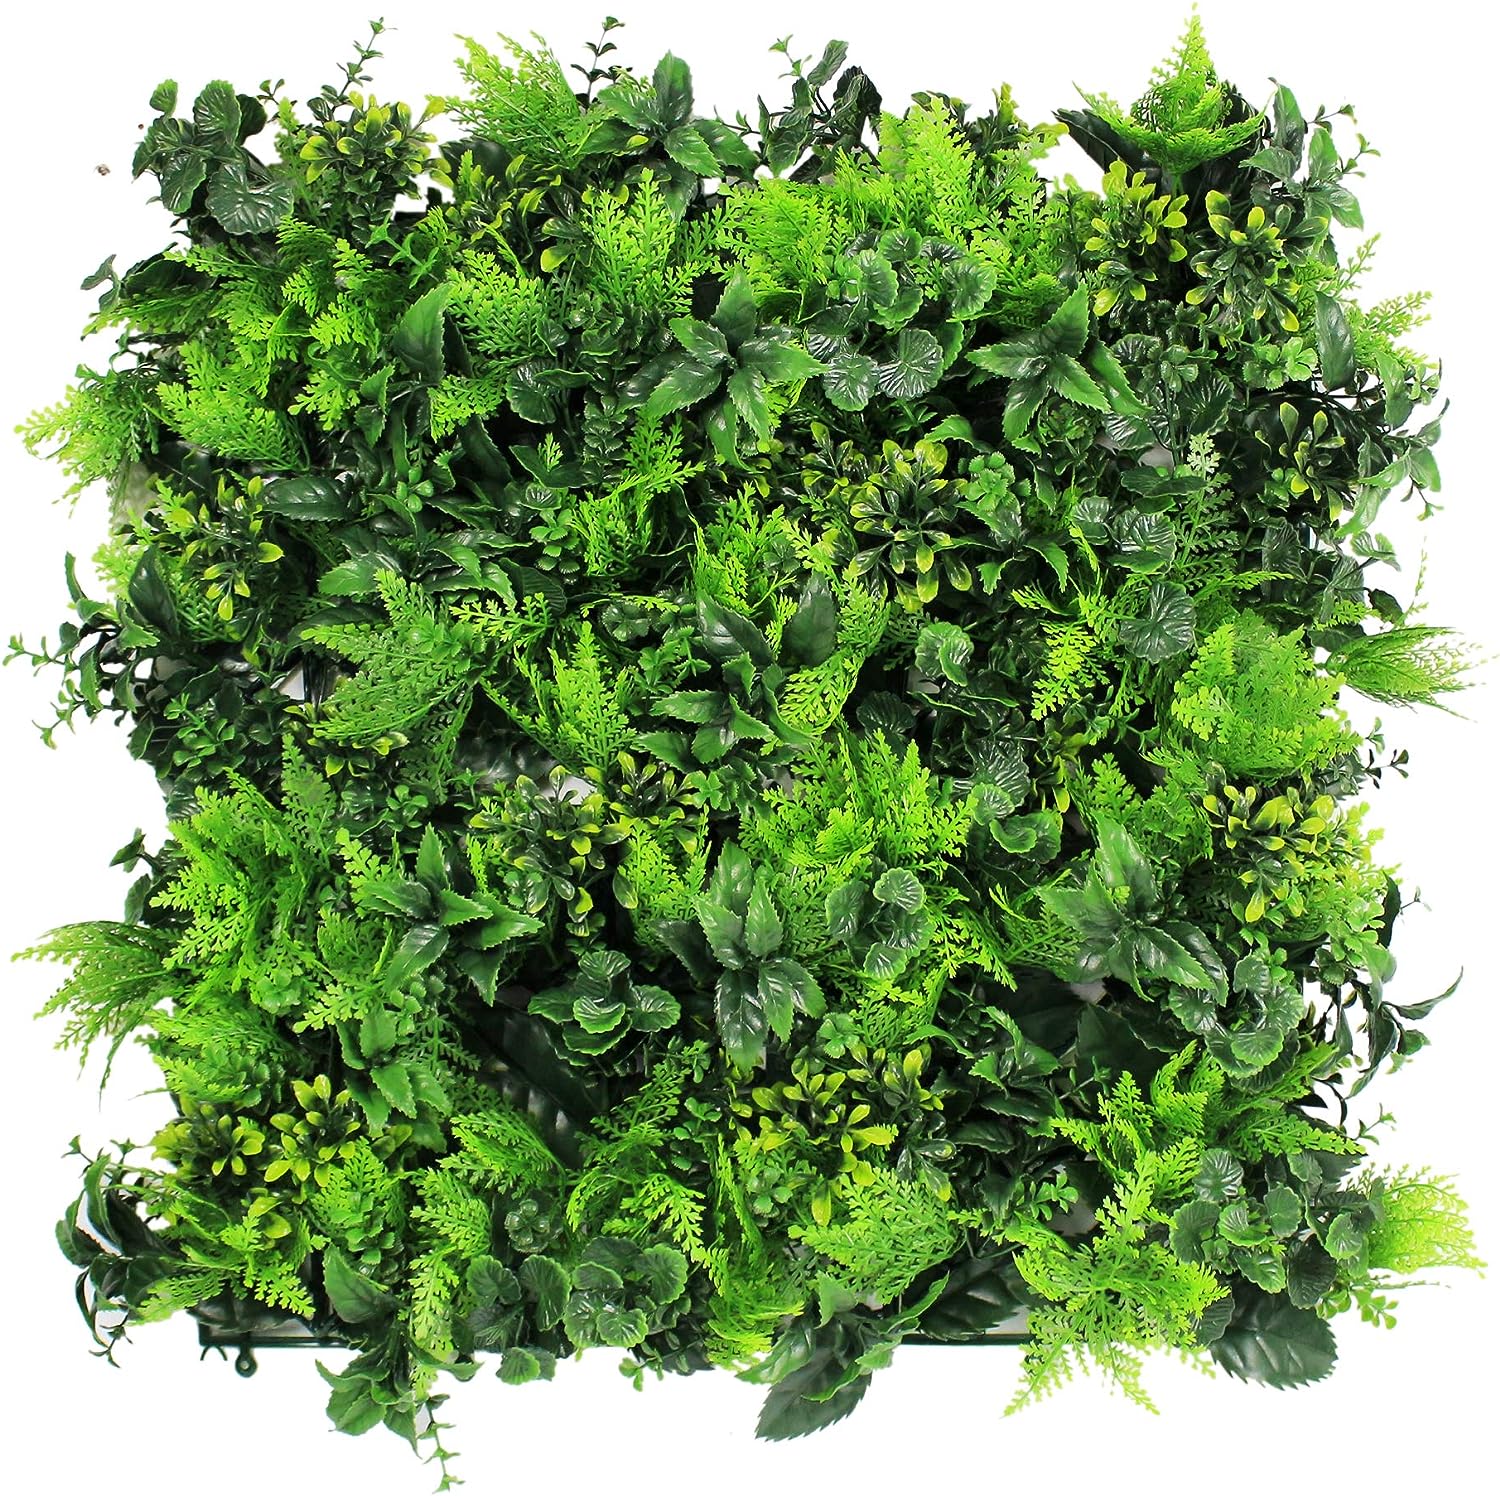 ULAND Artificial Topiary Hedges Panels, Plastic Faux [...]